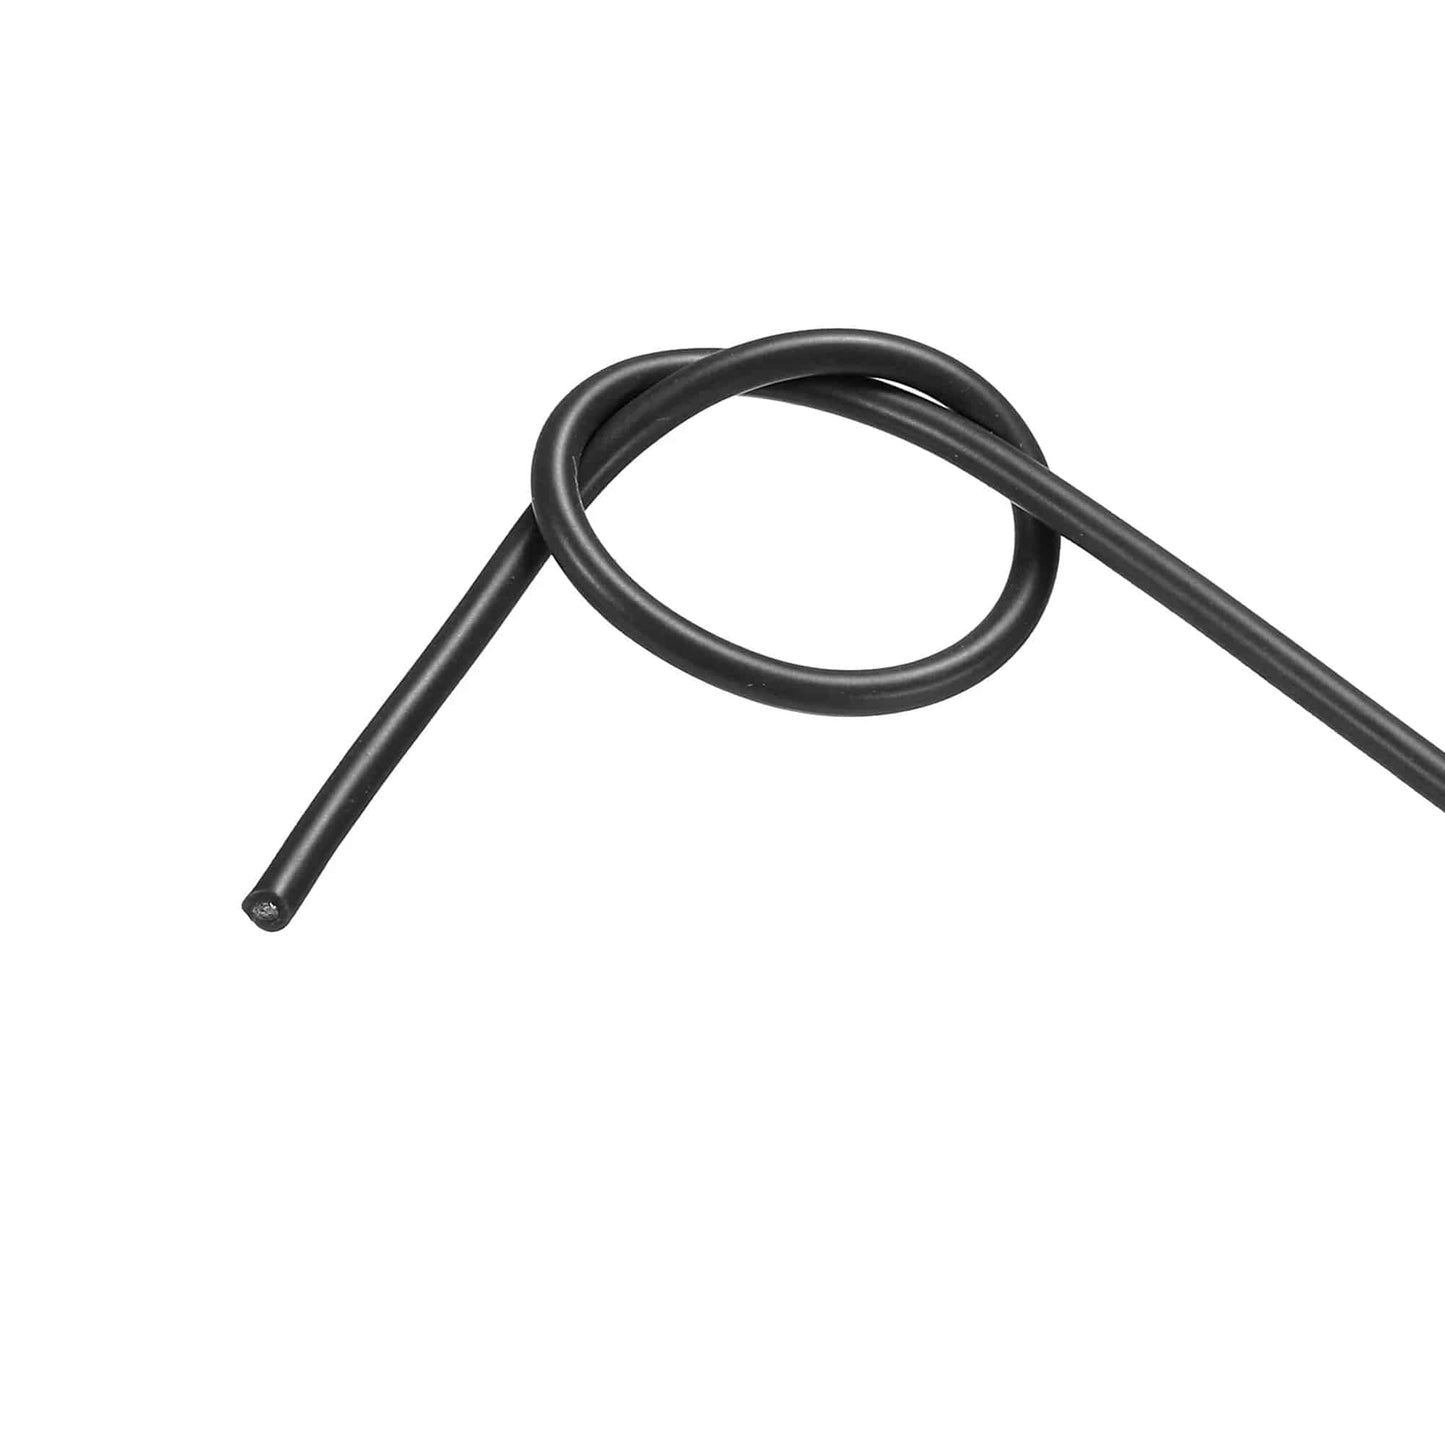 Hookup Wire 20 AWG Twisted Hookup Wire - Black